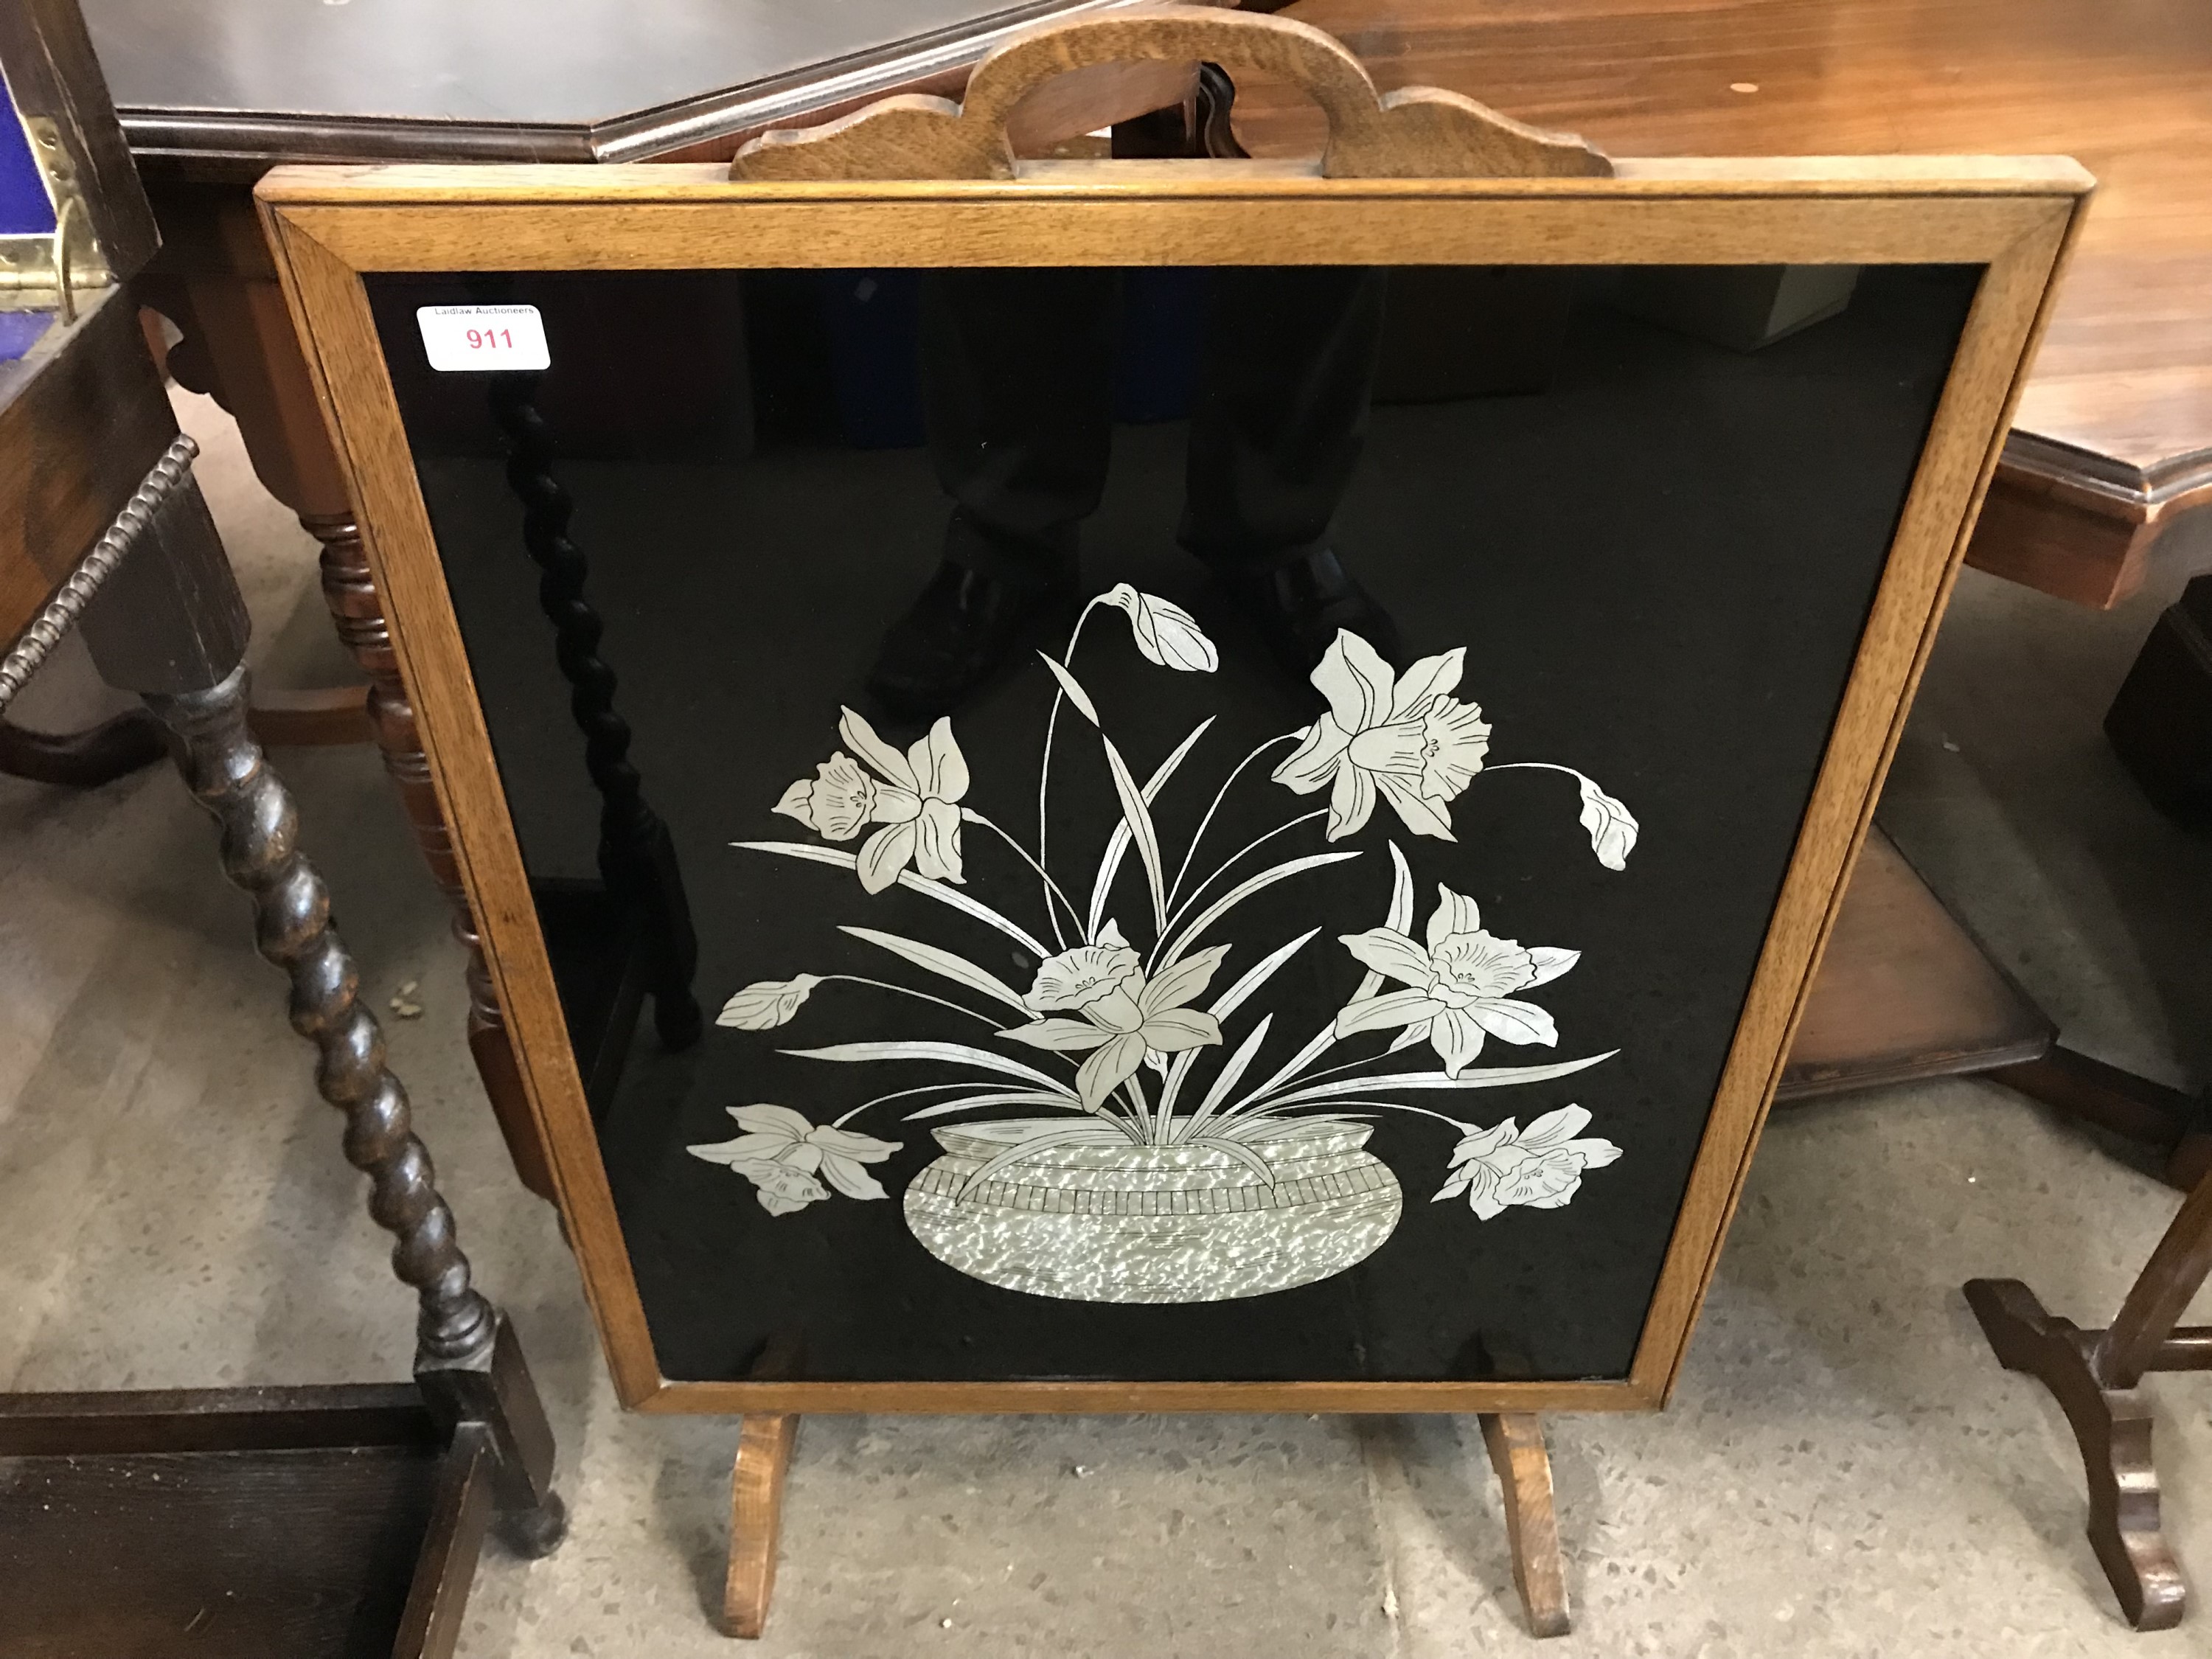 A 1920s mahogany fire screen with verre églomisé style glass insert